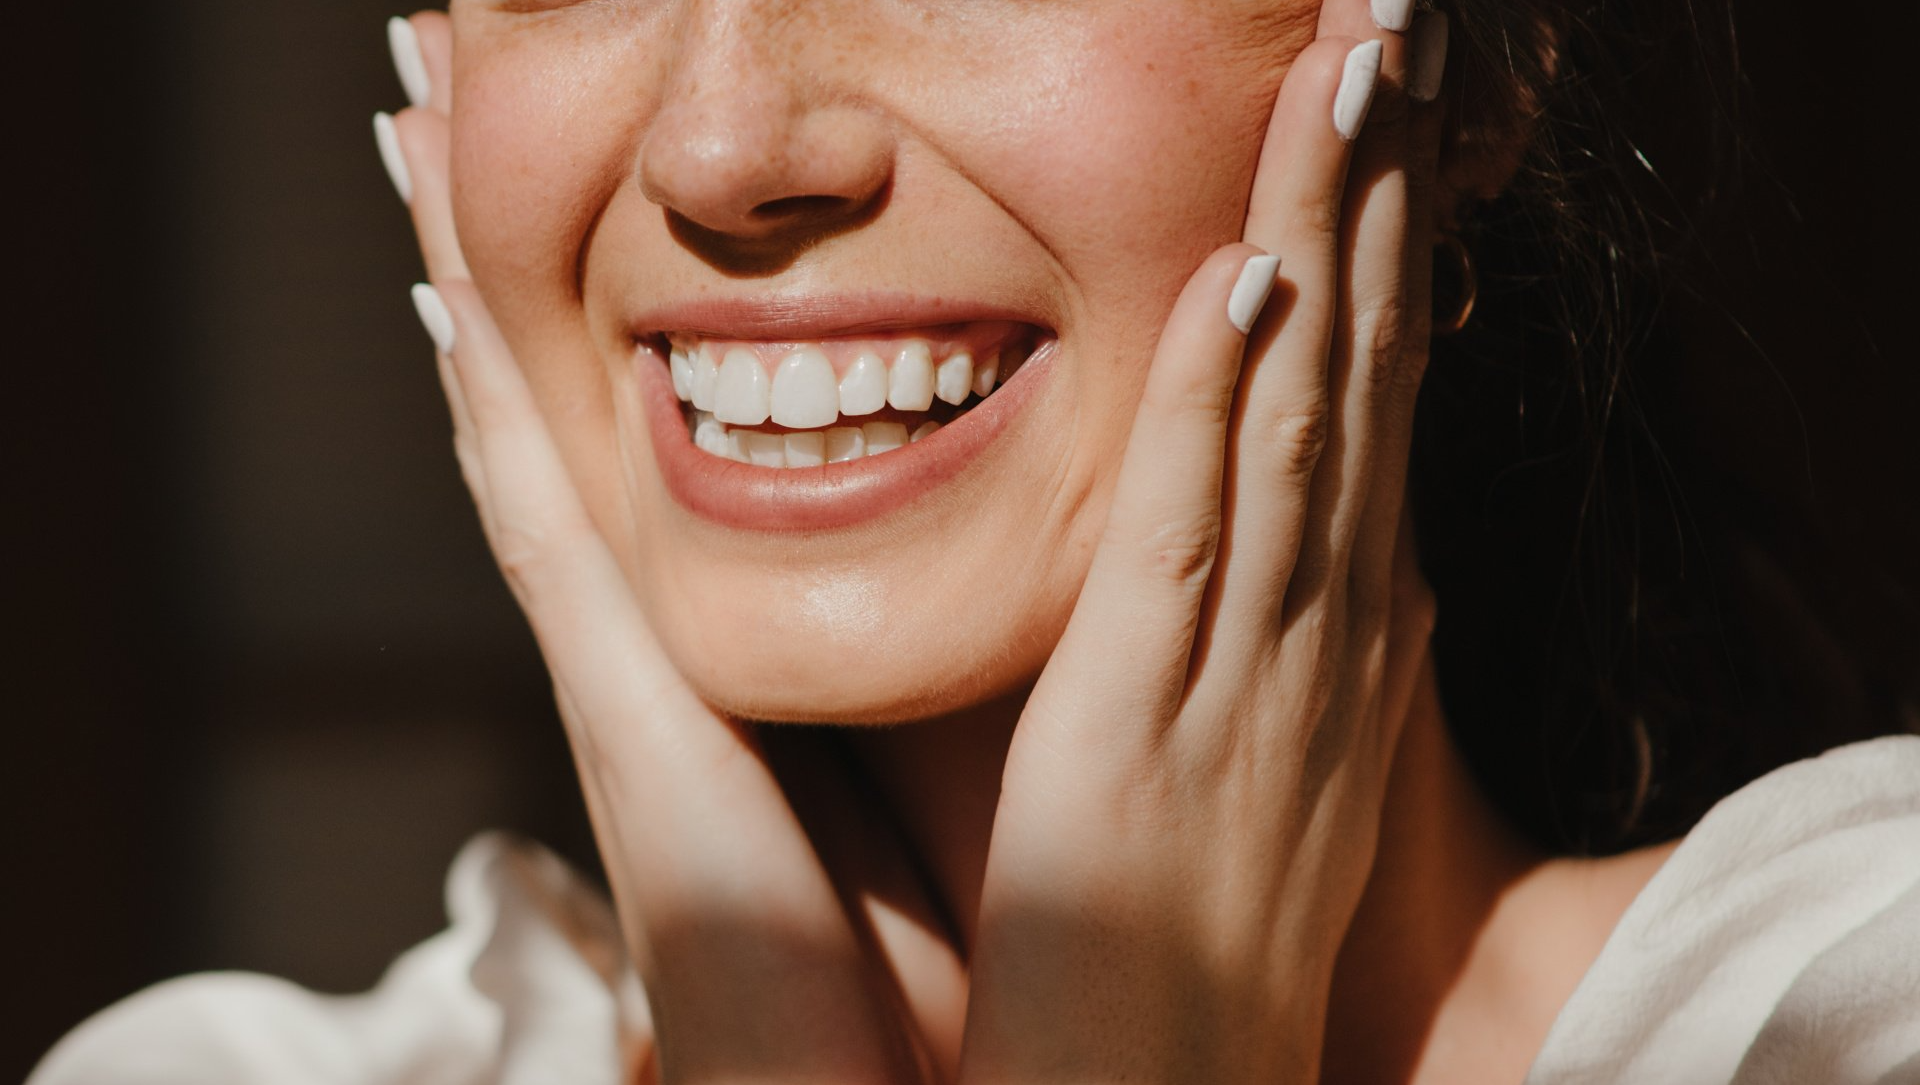 A close up of a woman smiling, full teeth, with nose and chin visible. Her hands are placed on either cheek